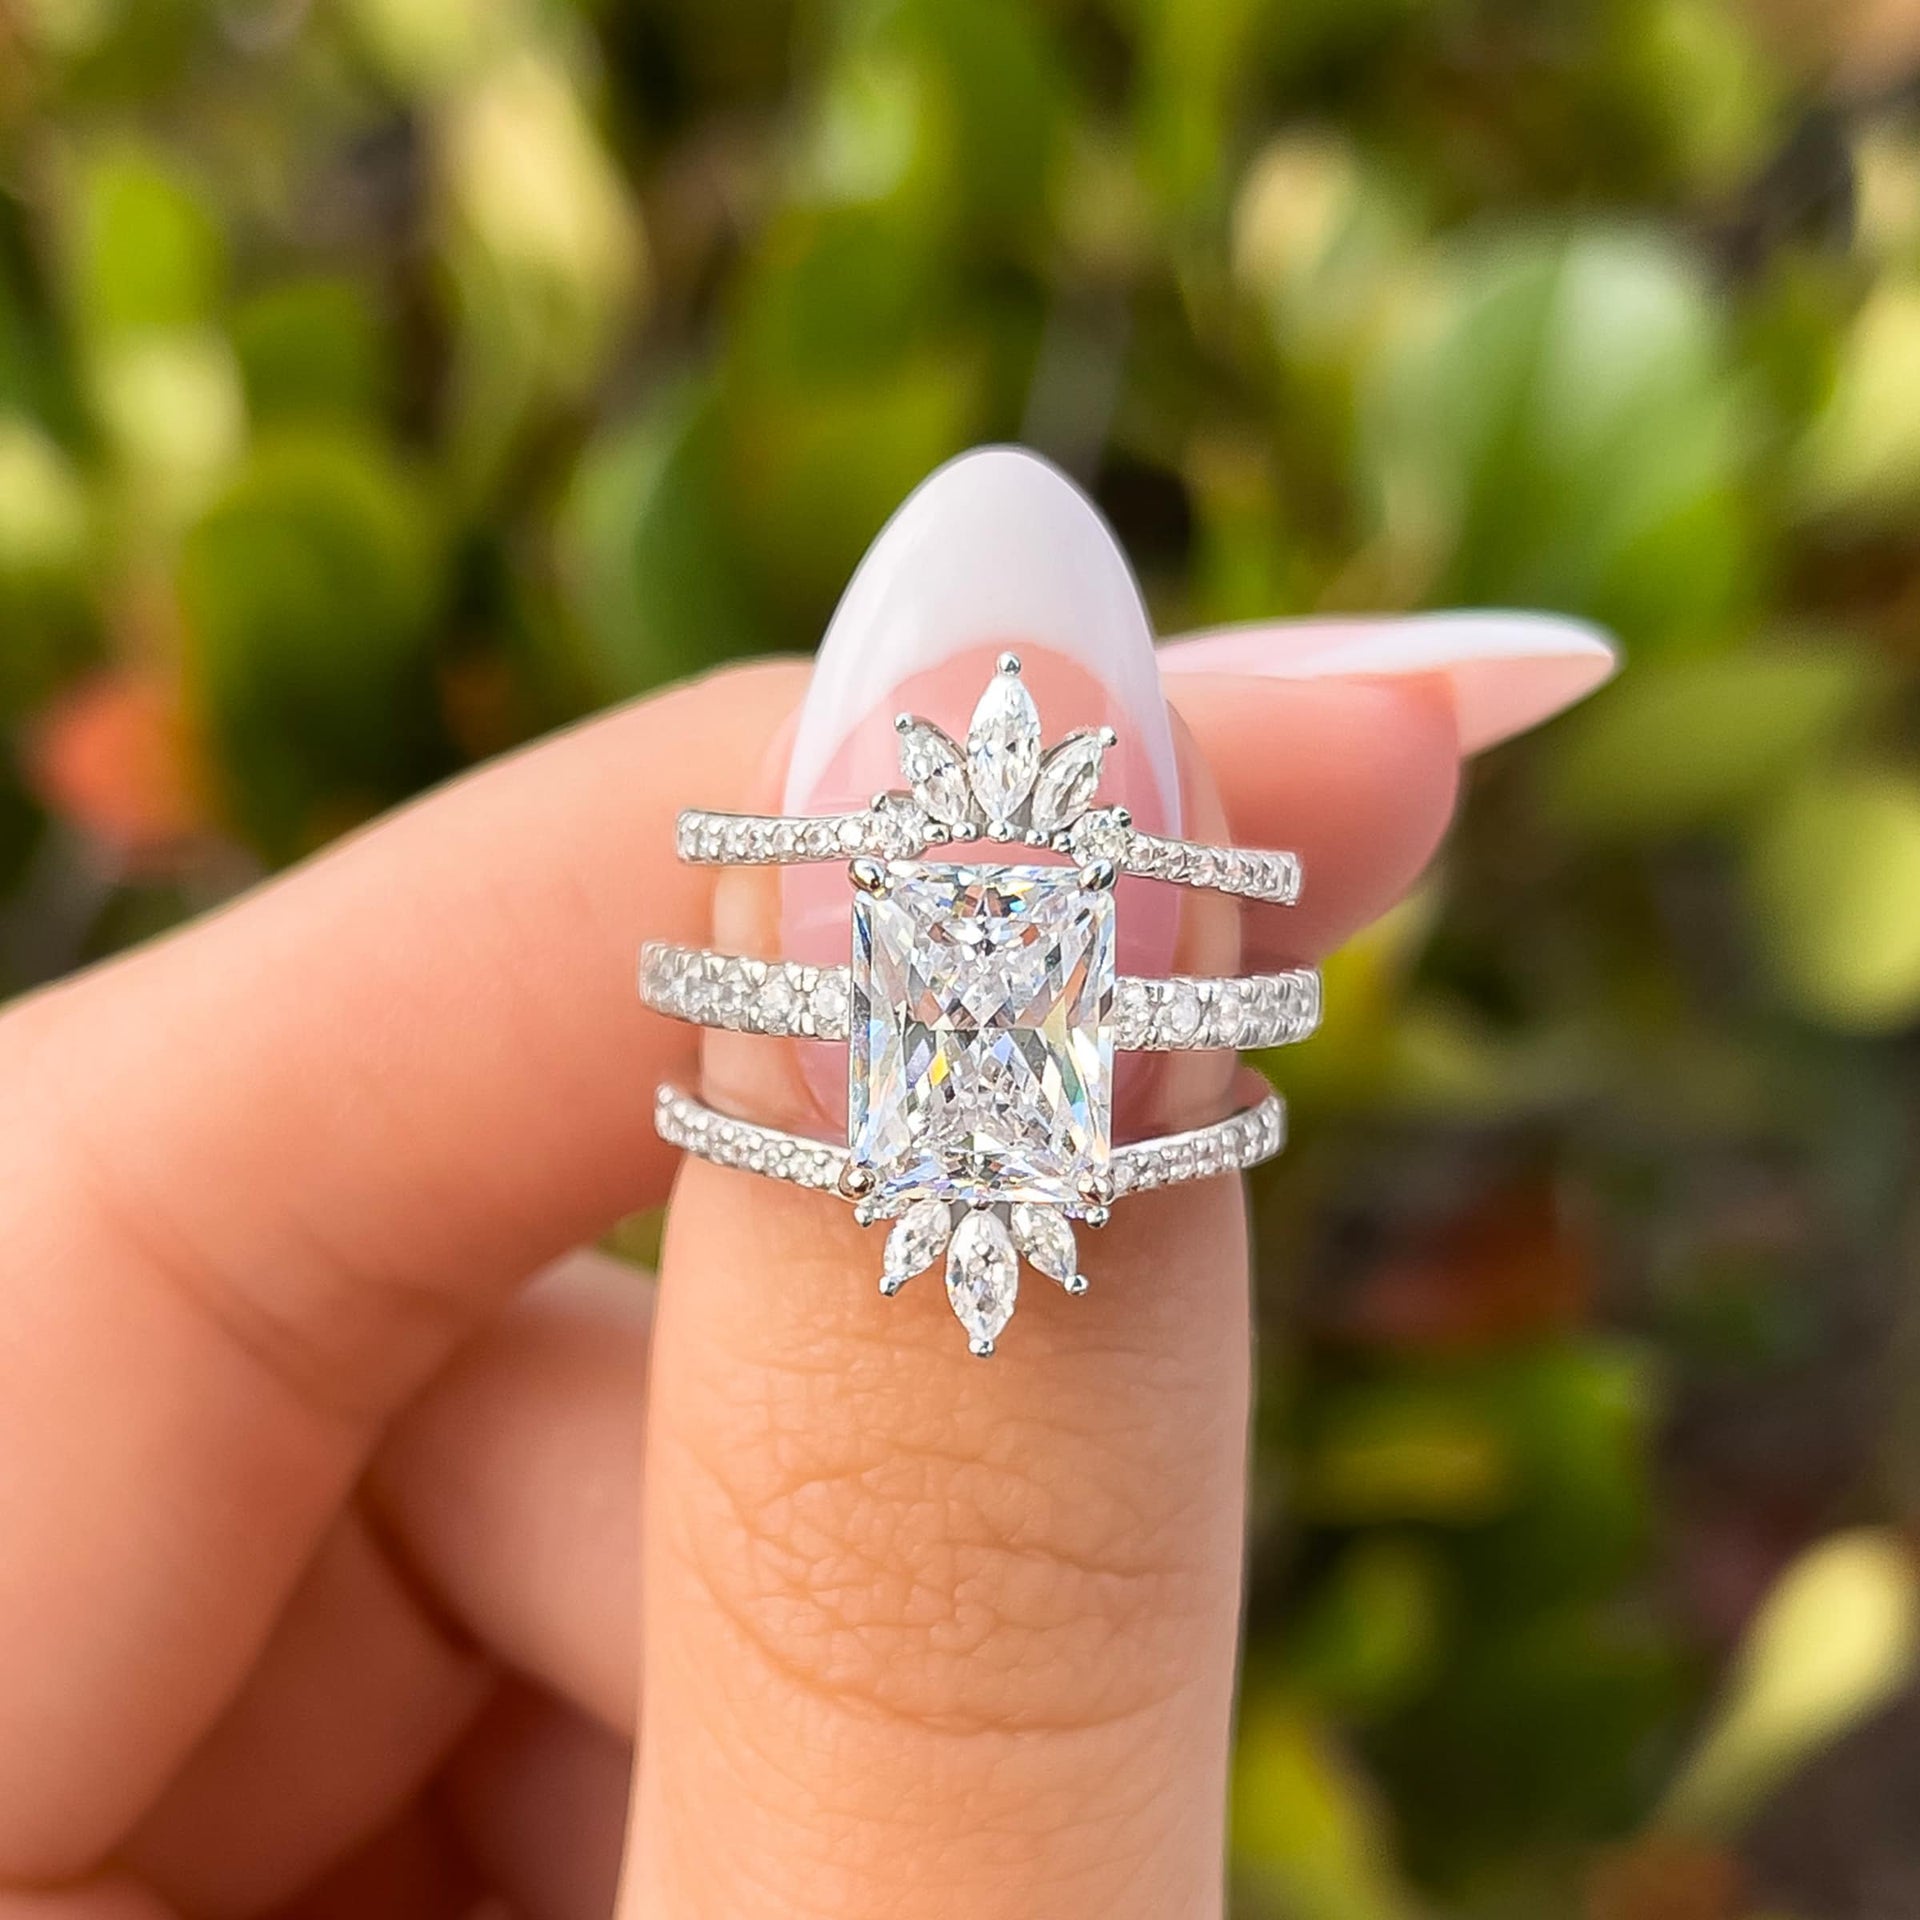 silver radiant cut engagement ring paired with two boho bands on female hand with french tip nails